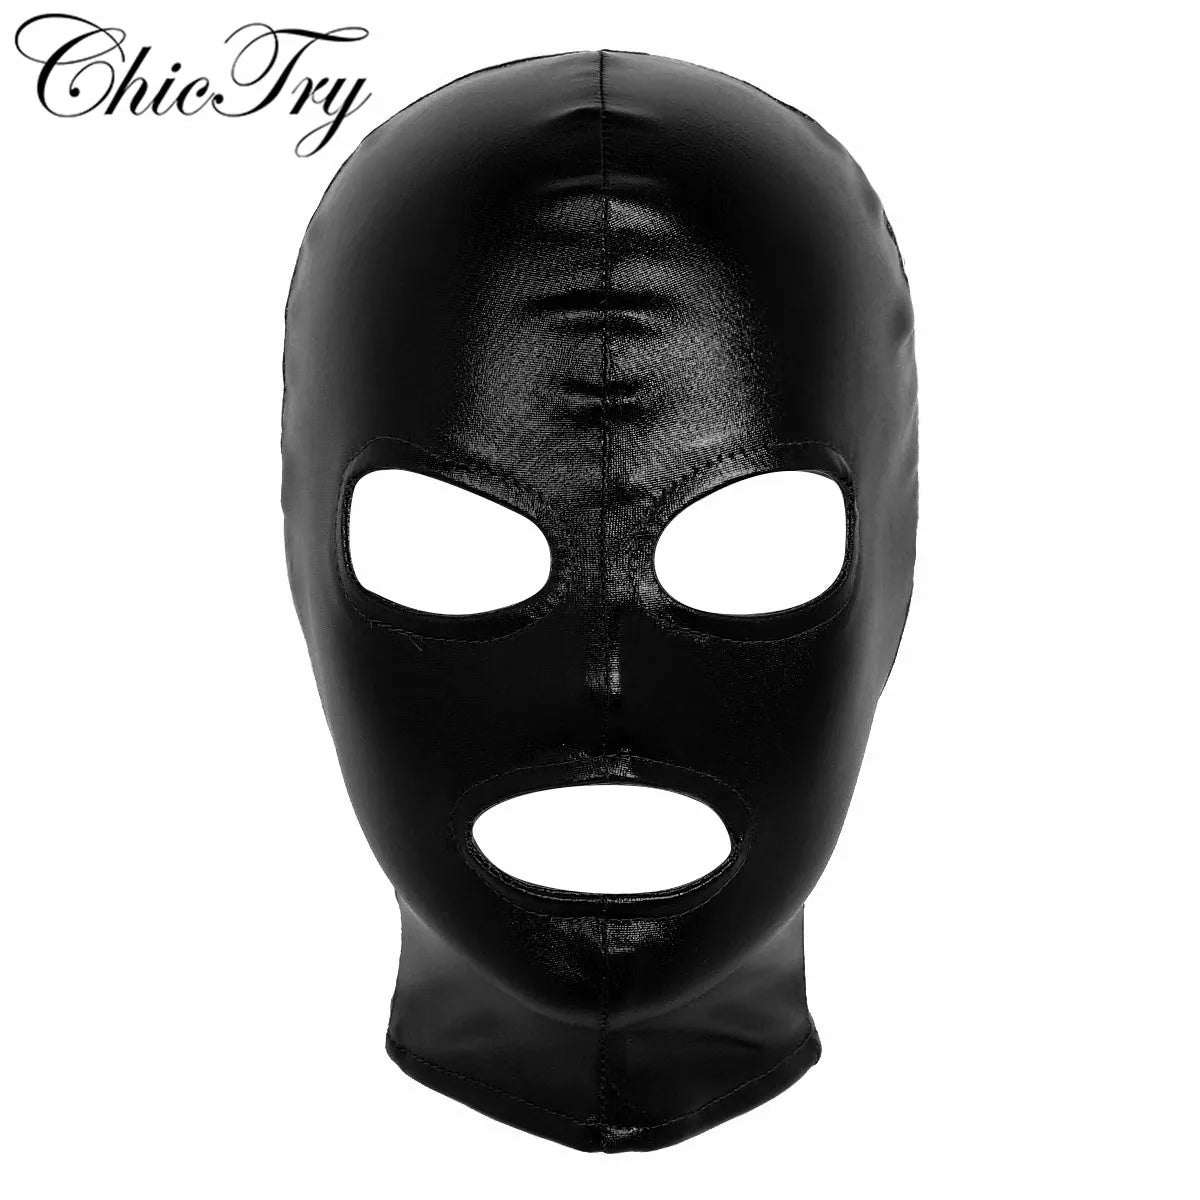 Unisex Women Mens Cosplay Face Mask Latex Shiny Metallic Open Eyes and Mouth Headgear Full Face Mask Hood for Role Play Costume